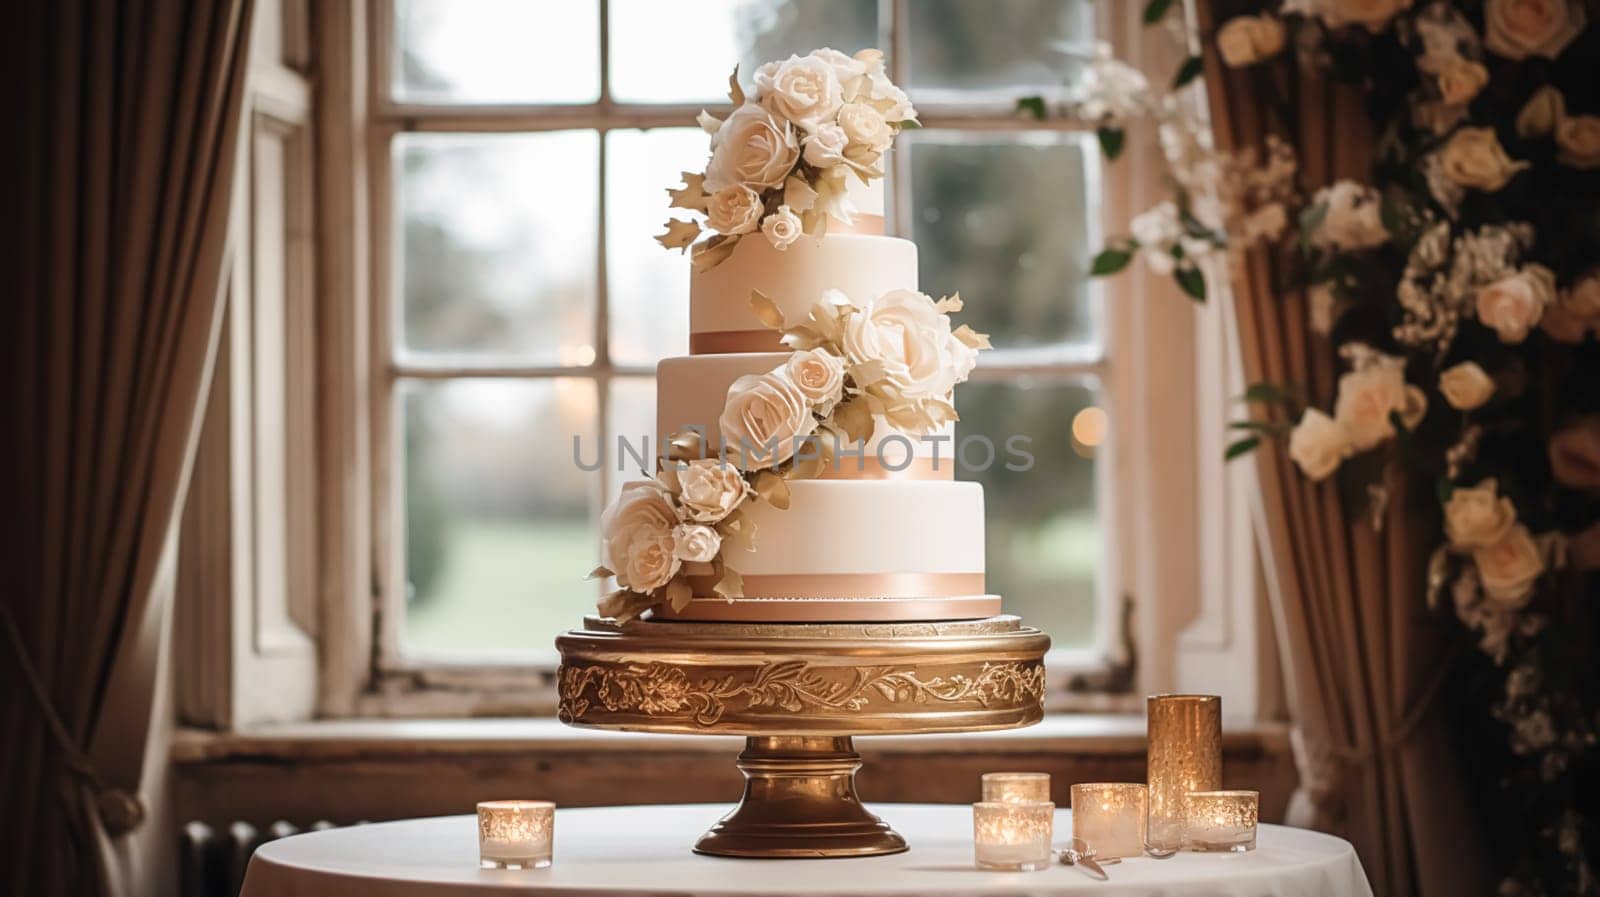 Wedding cake design, autumnal dessert styling and holiday decoration, multi-tier cake for an autumn event venue, food catering service and elegant country decor, cottage style inspiration